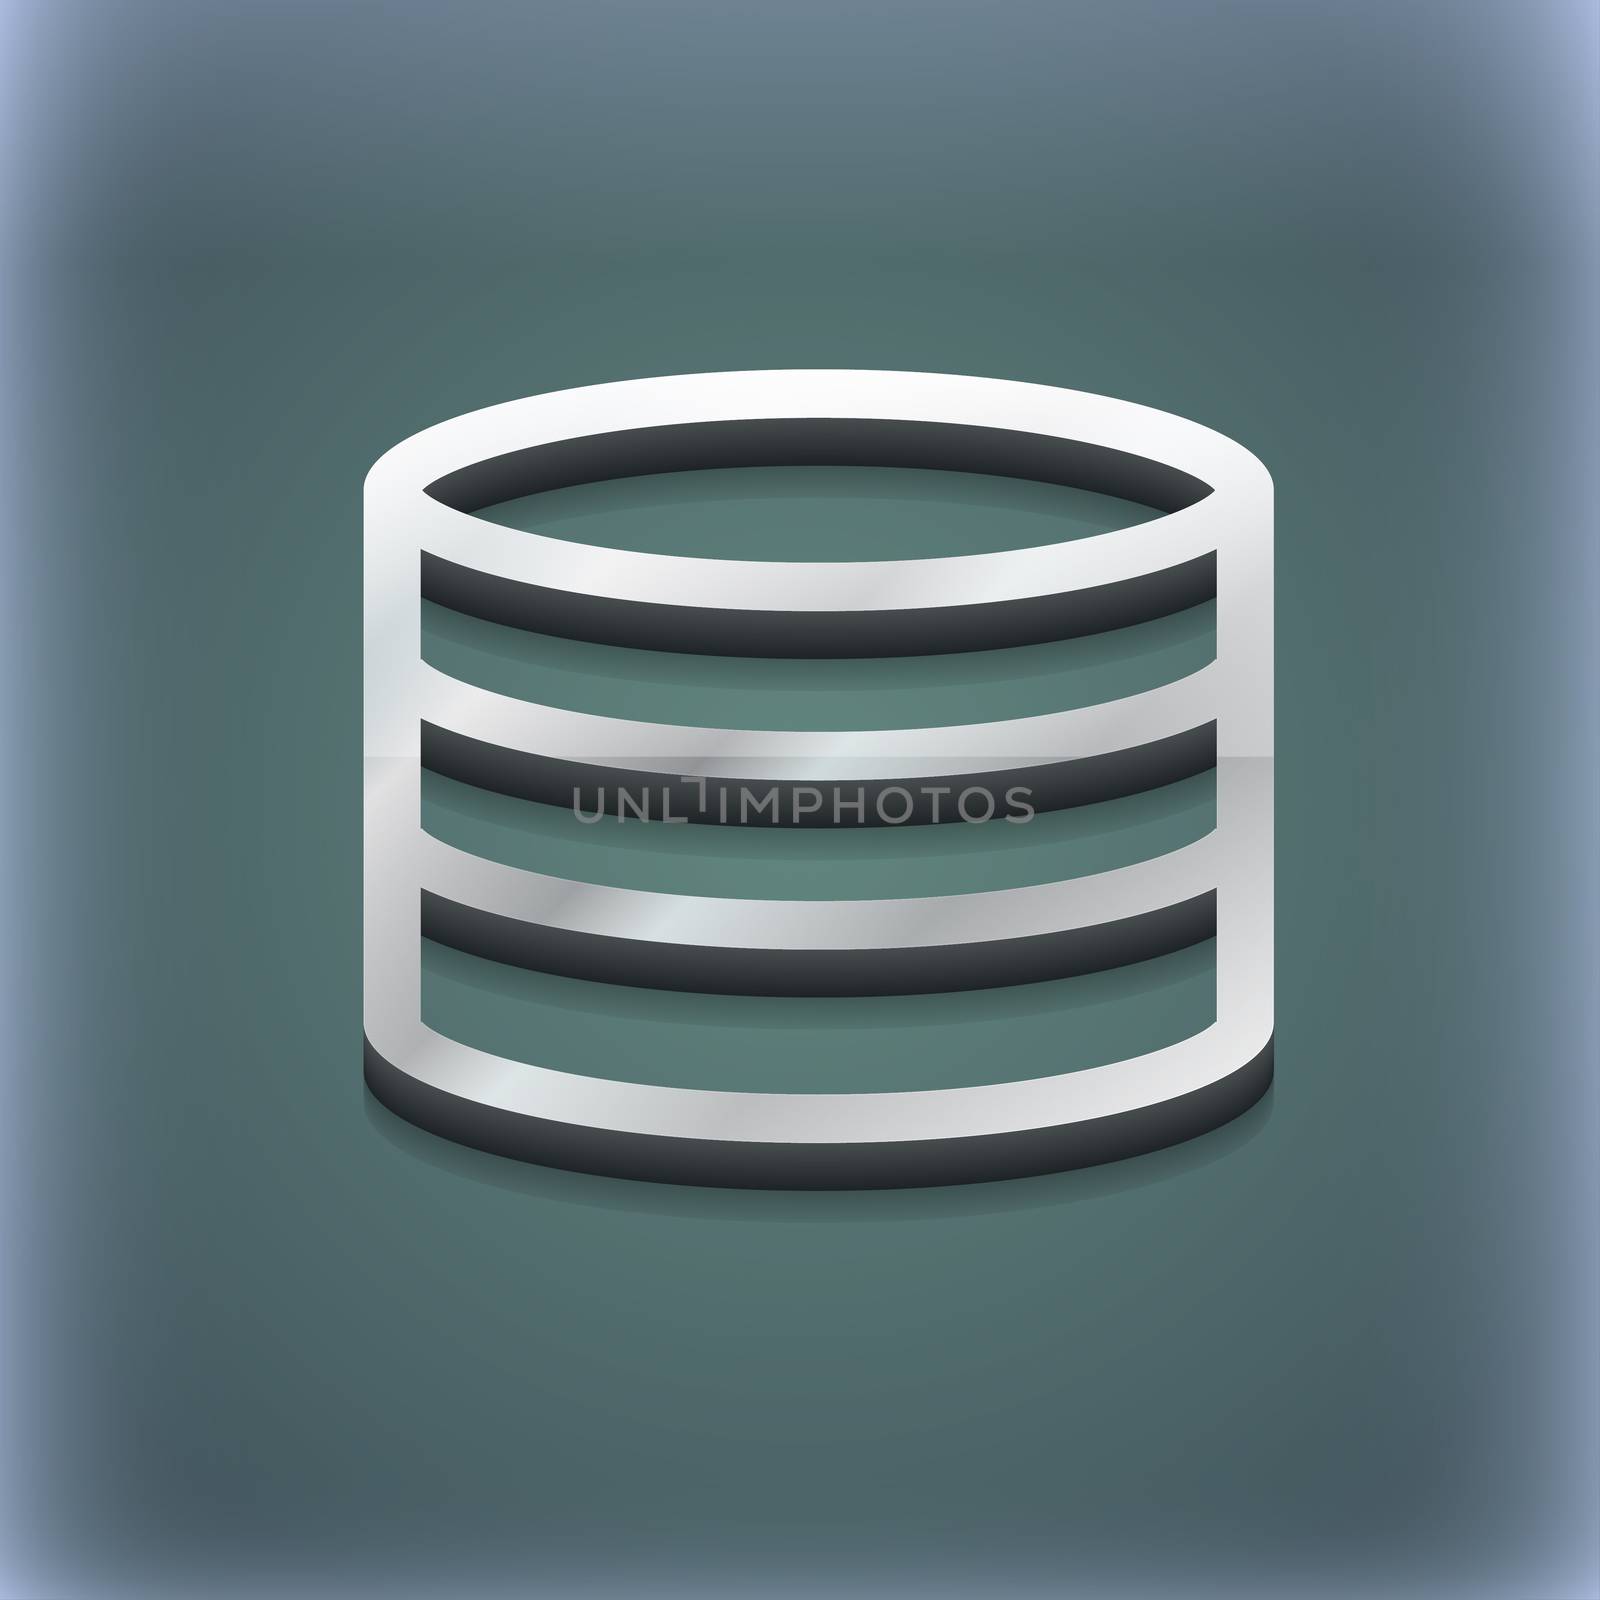 Hard disk and database icon symbol. 3D style. Trendy, modern design with space for your text illustration. Raster version